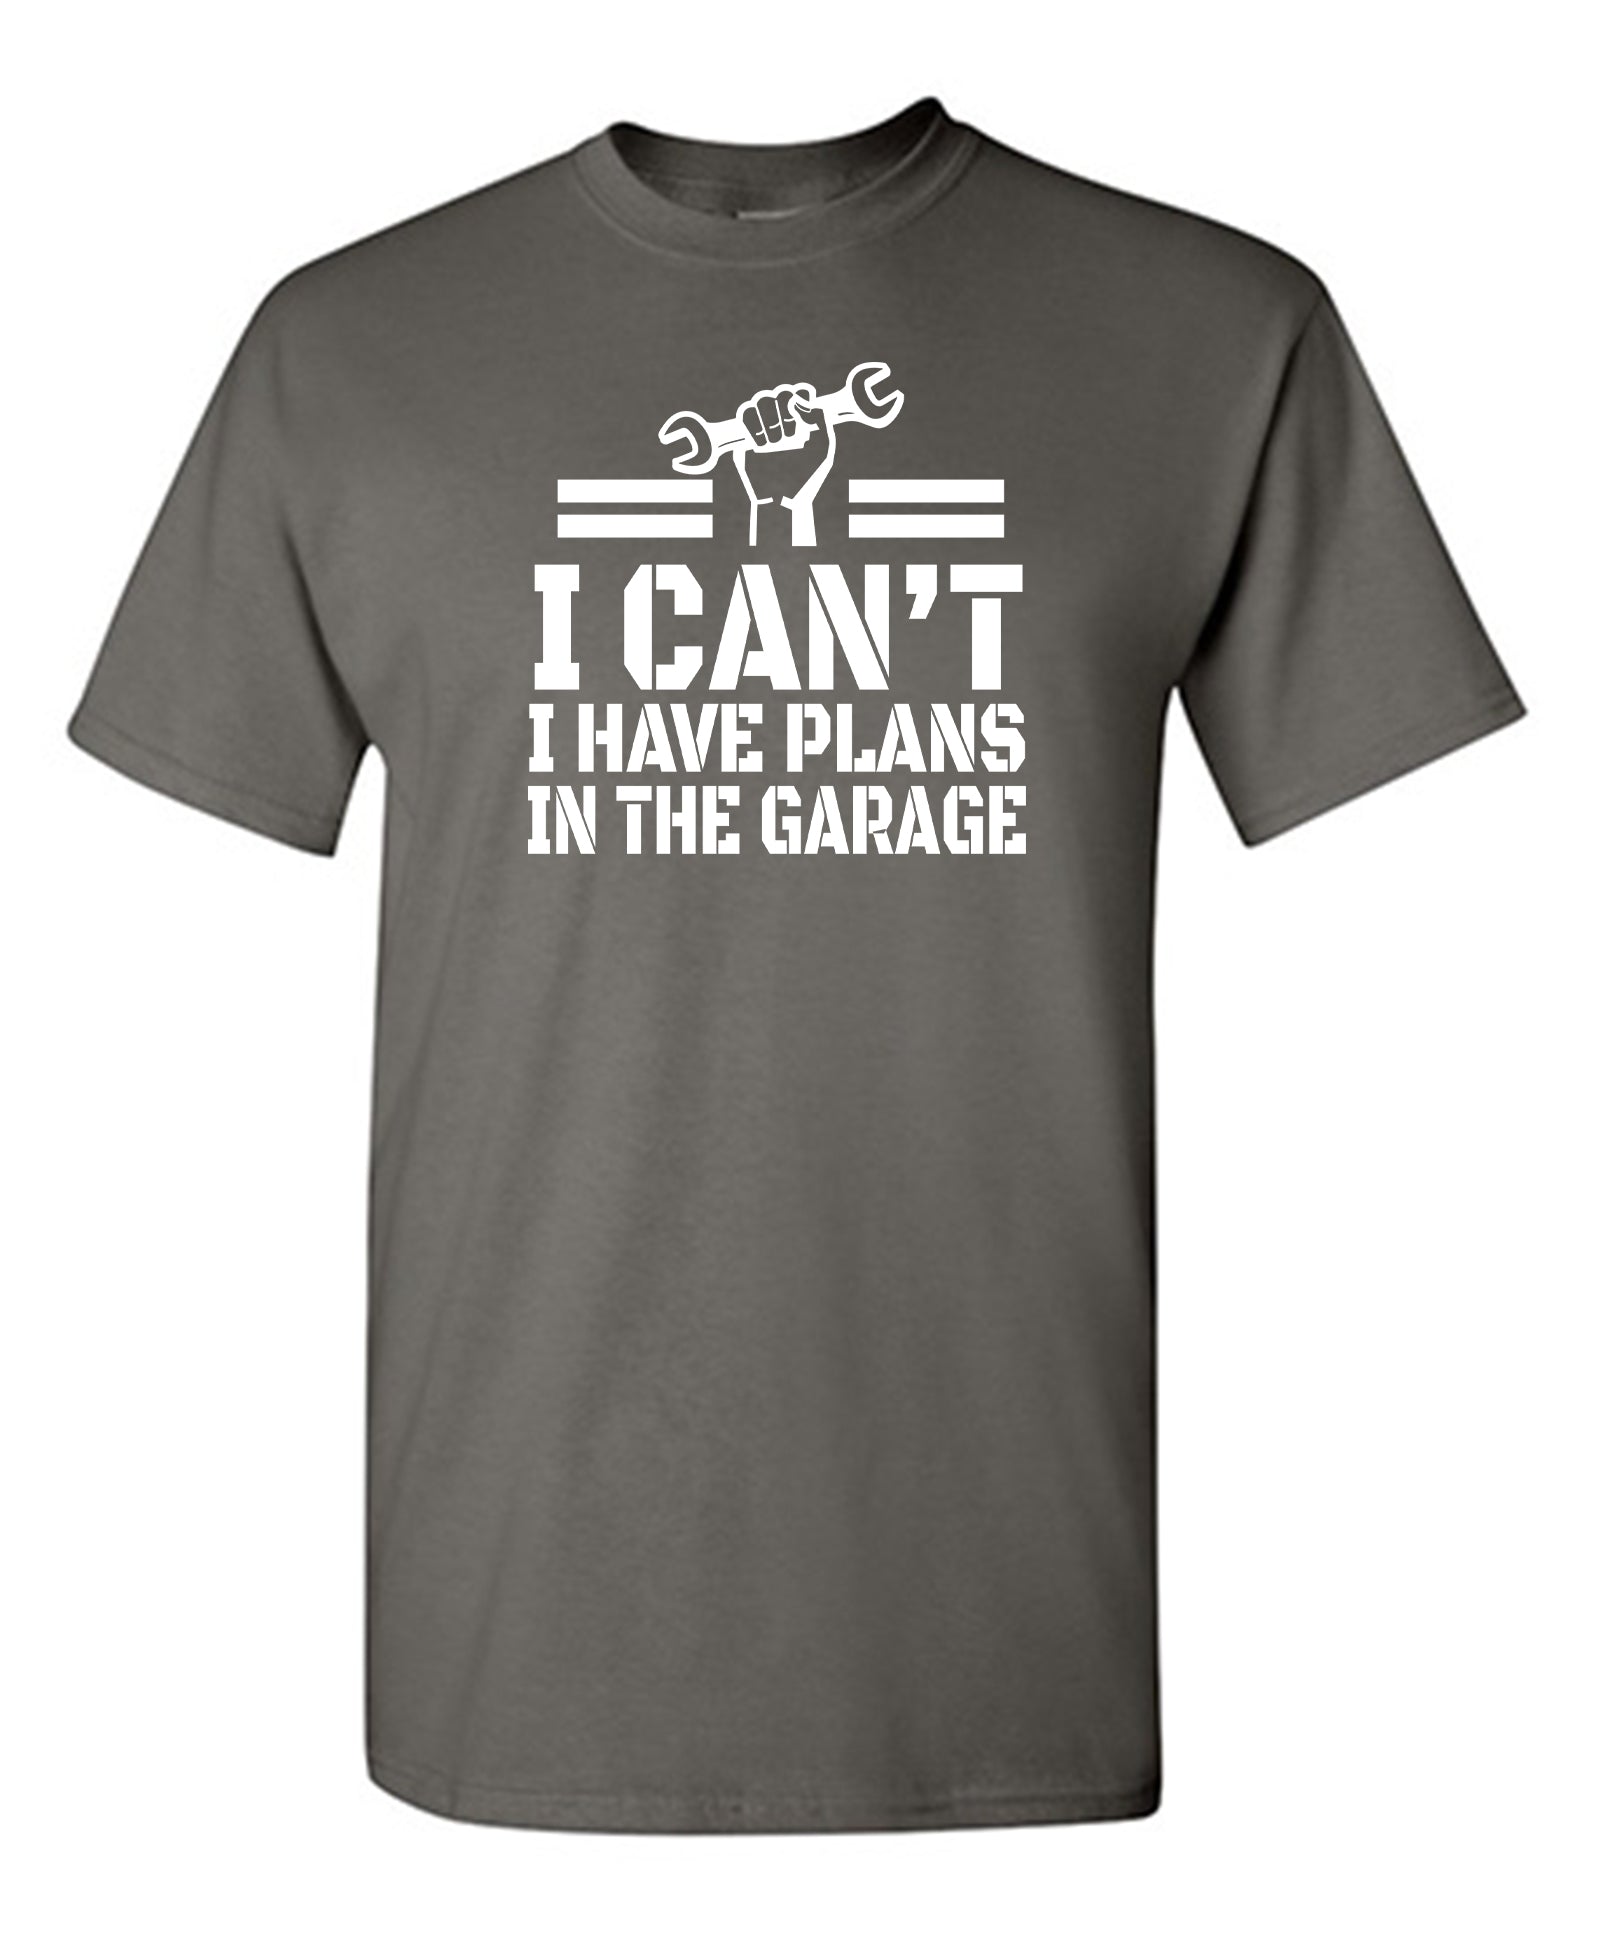 Funny T-Shirts design "I Can't, I Have Plans In The Garage"